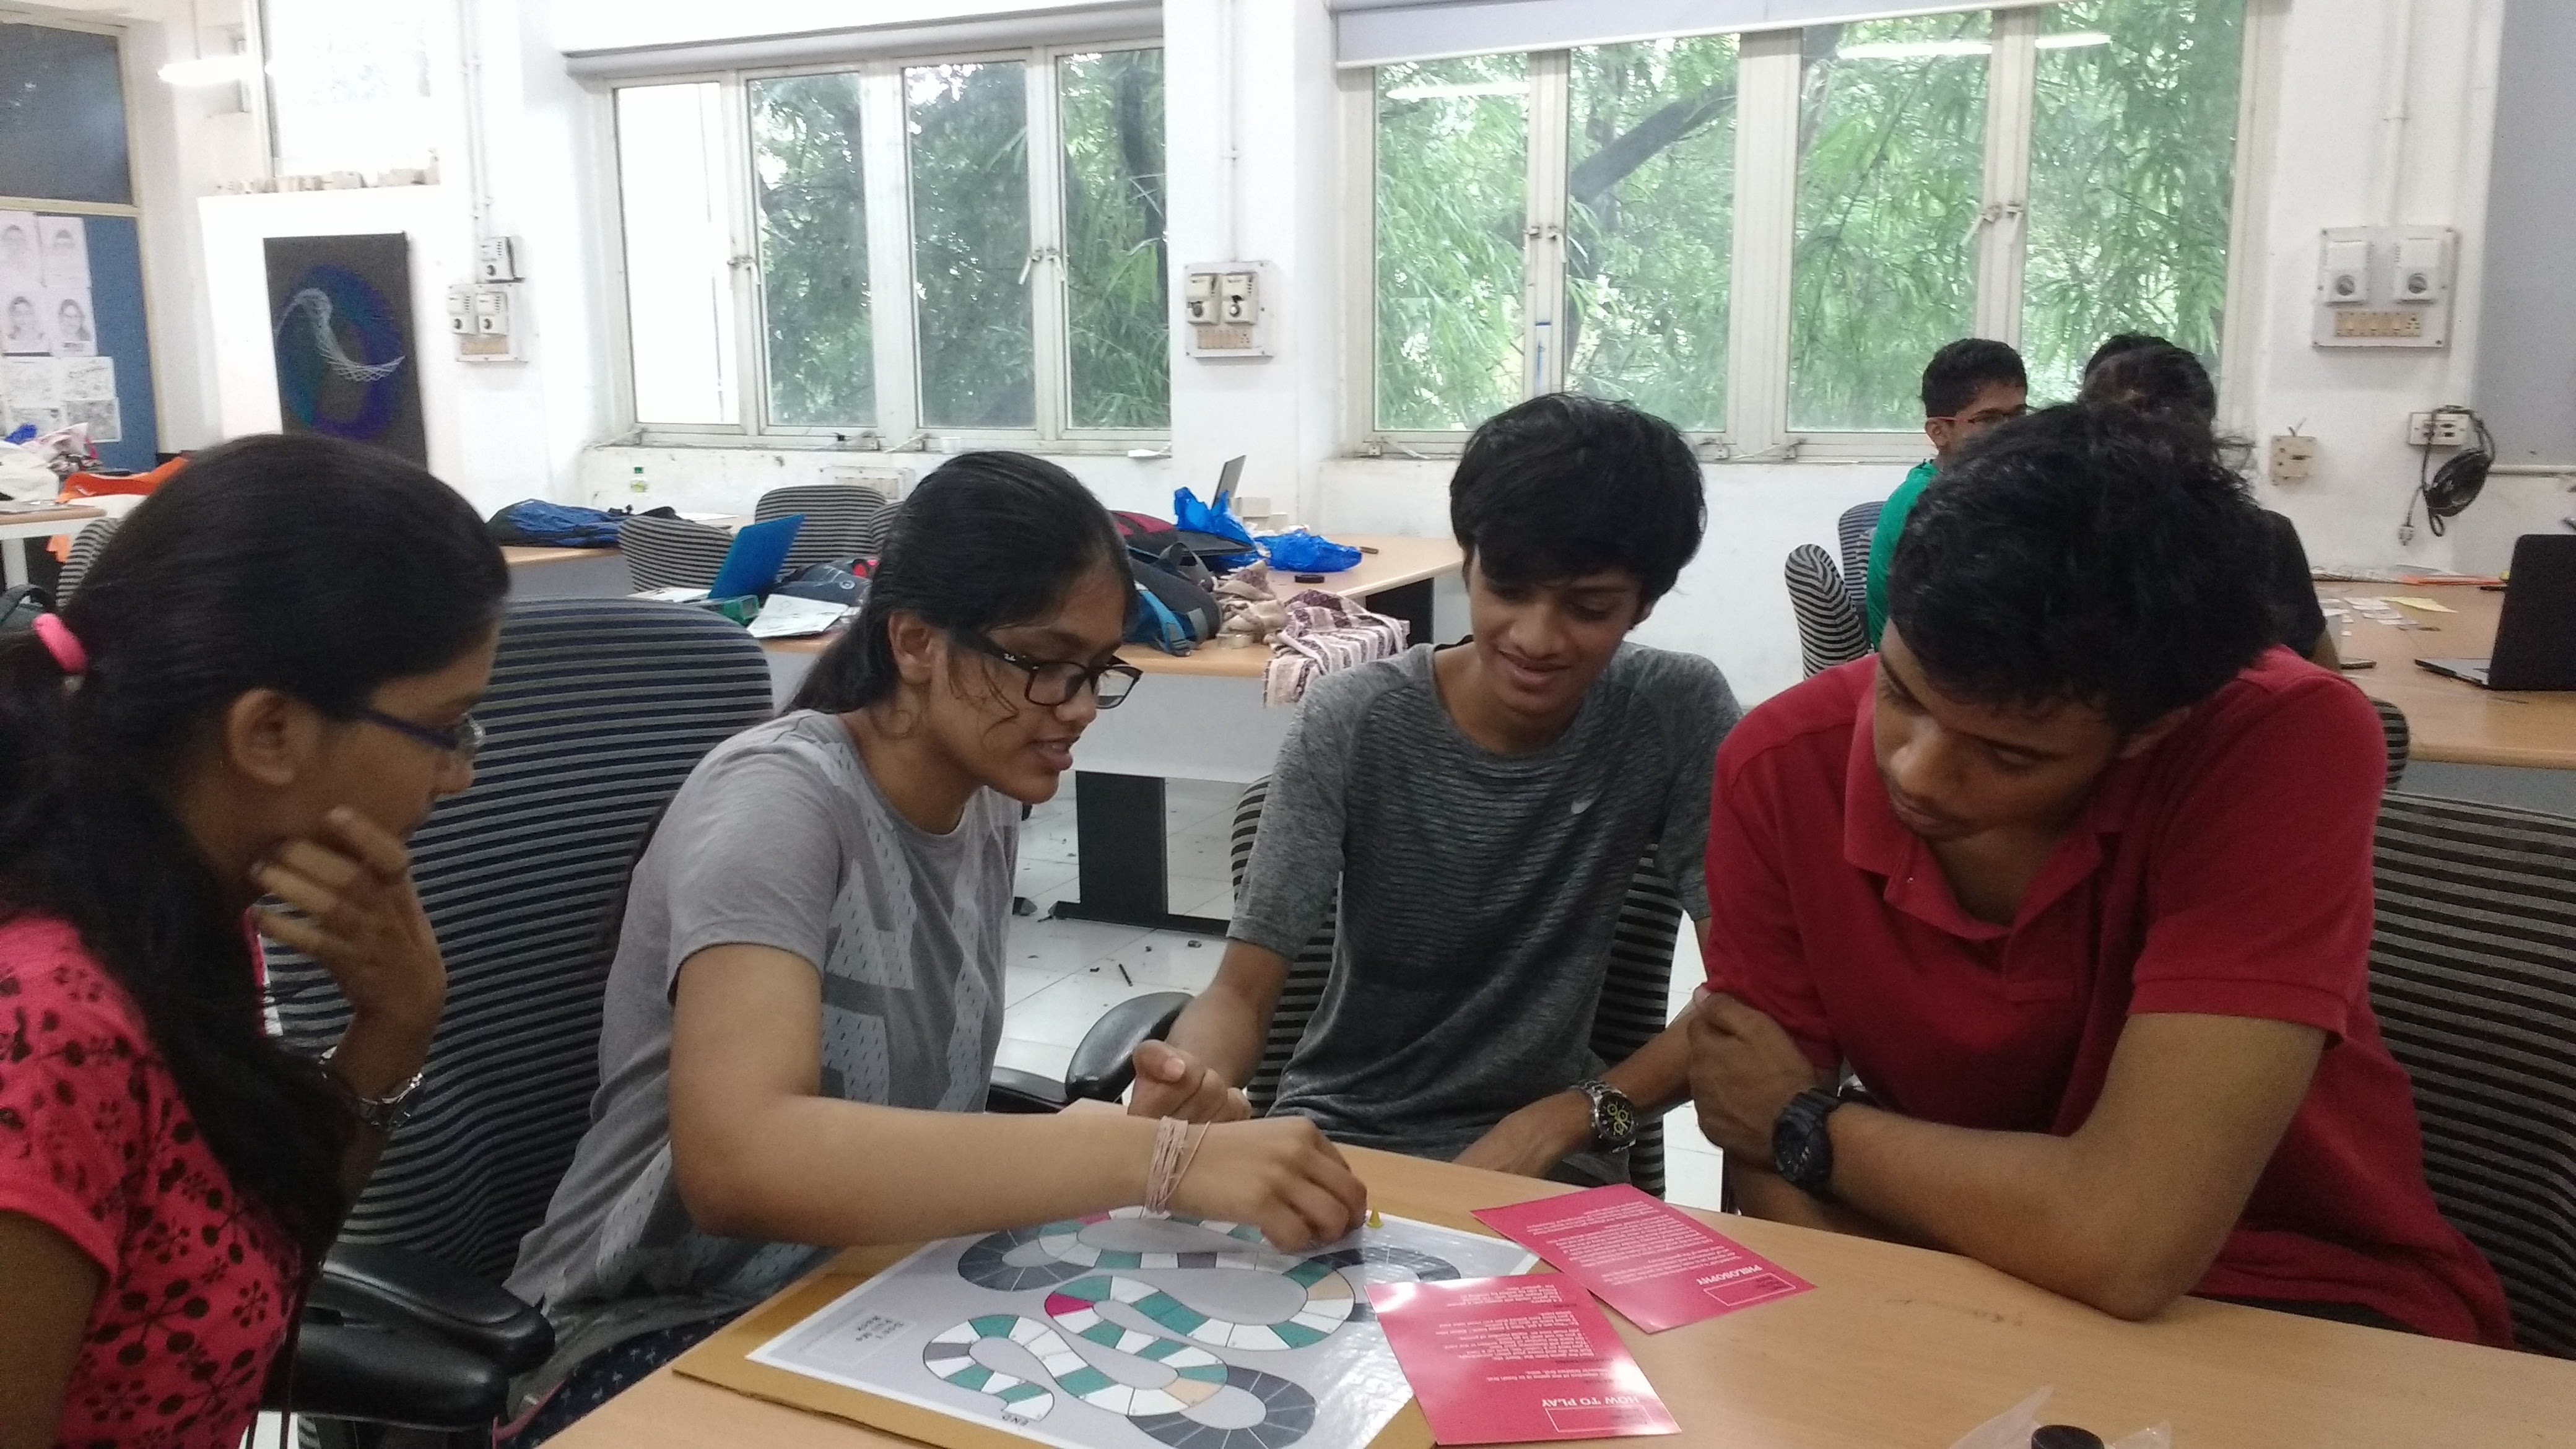 Students playing game